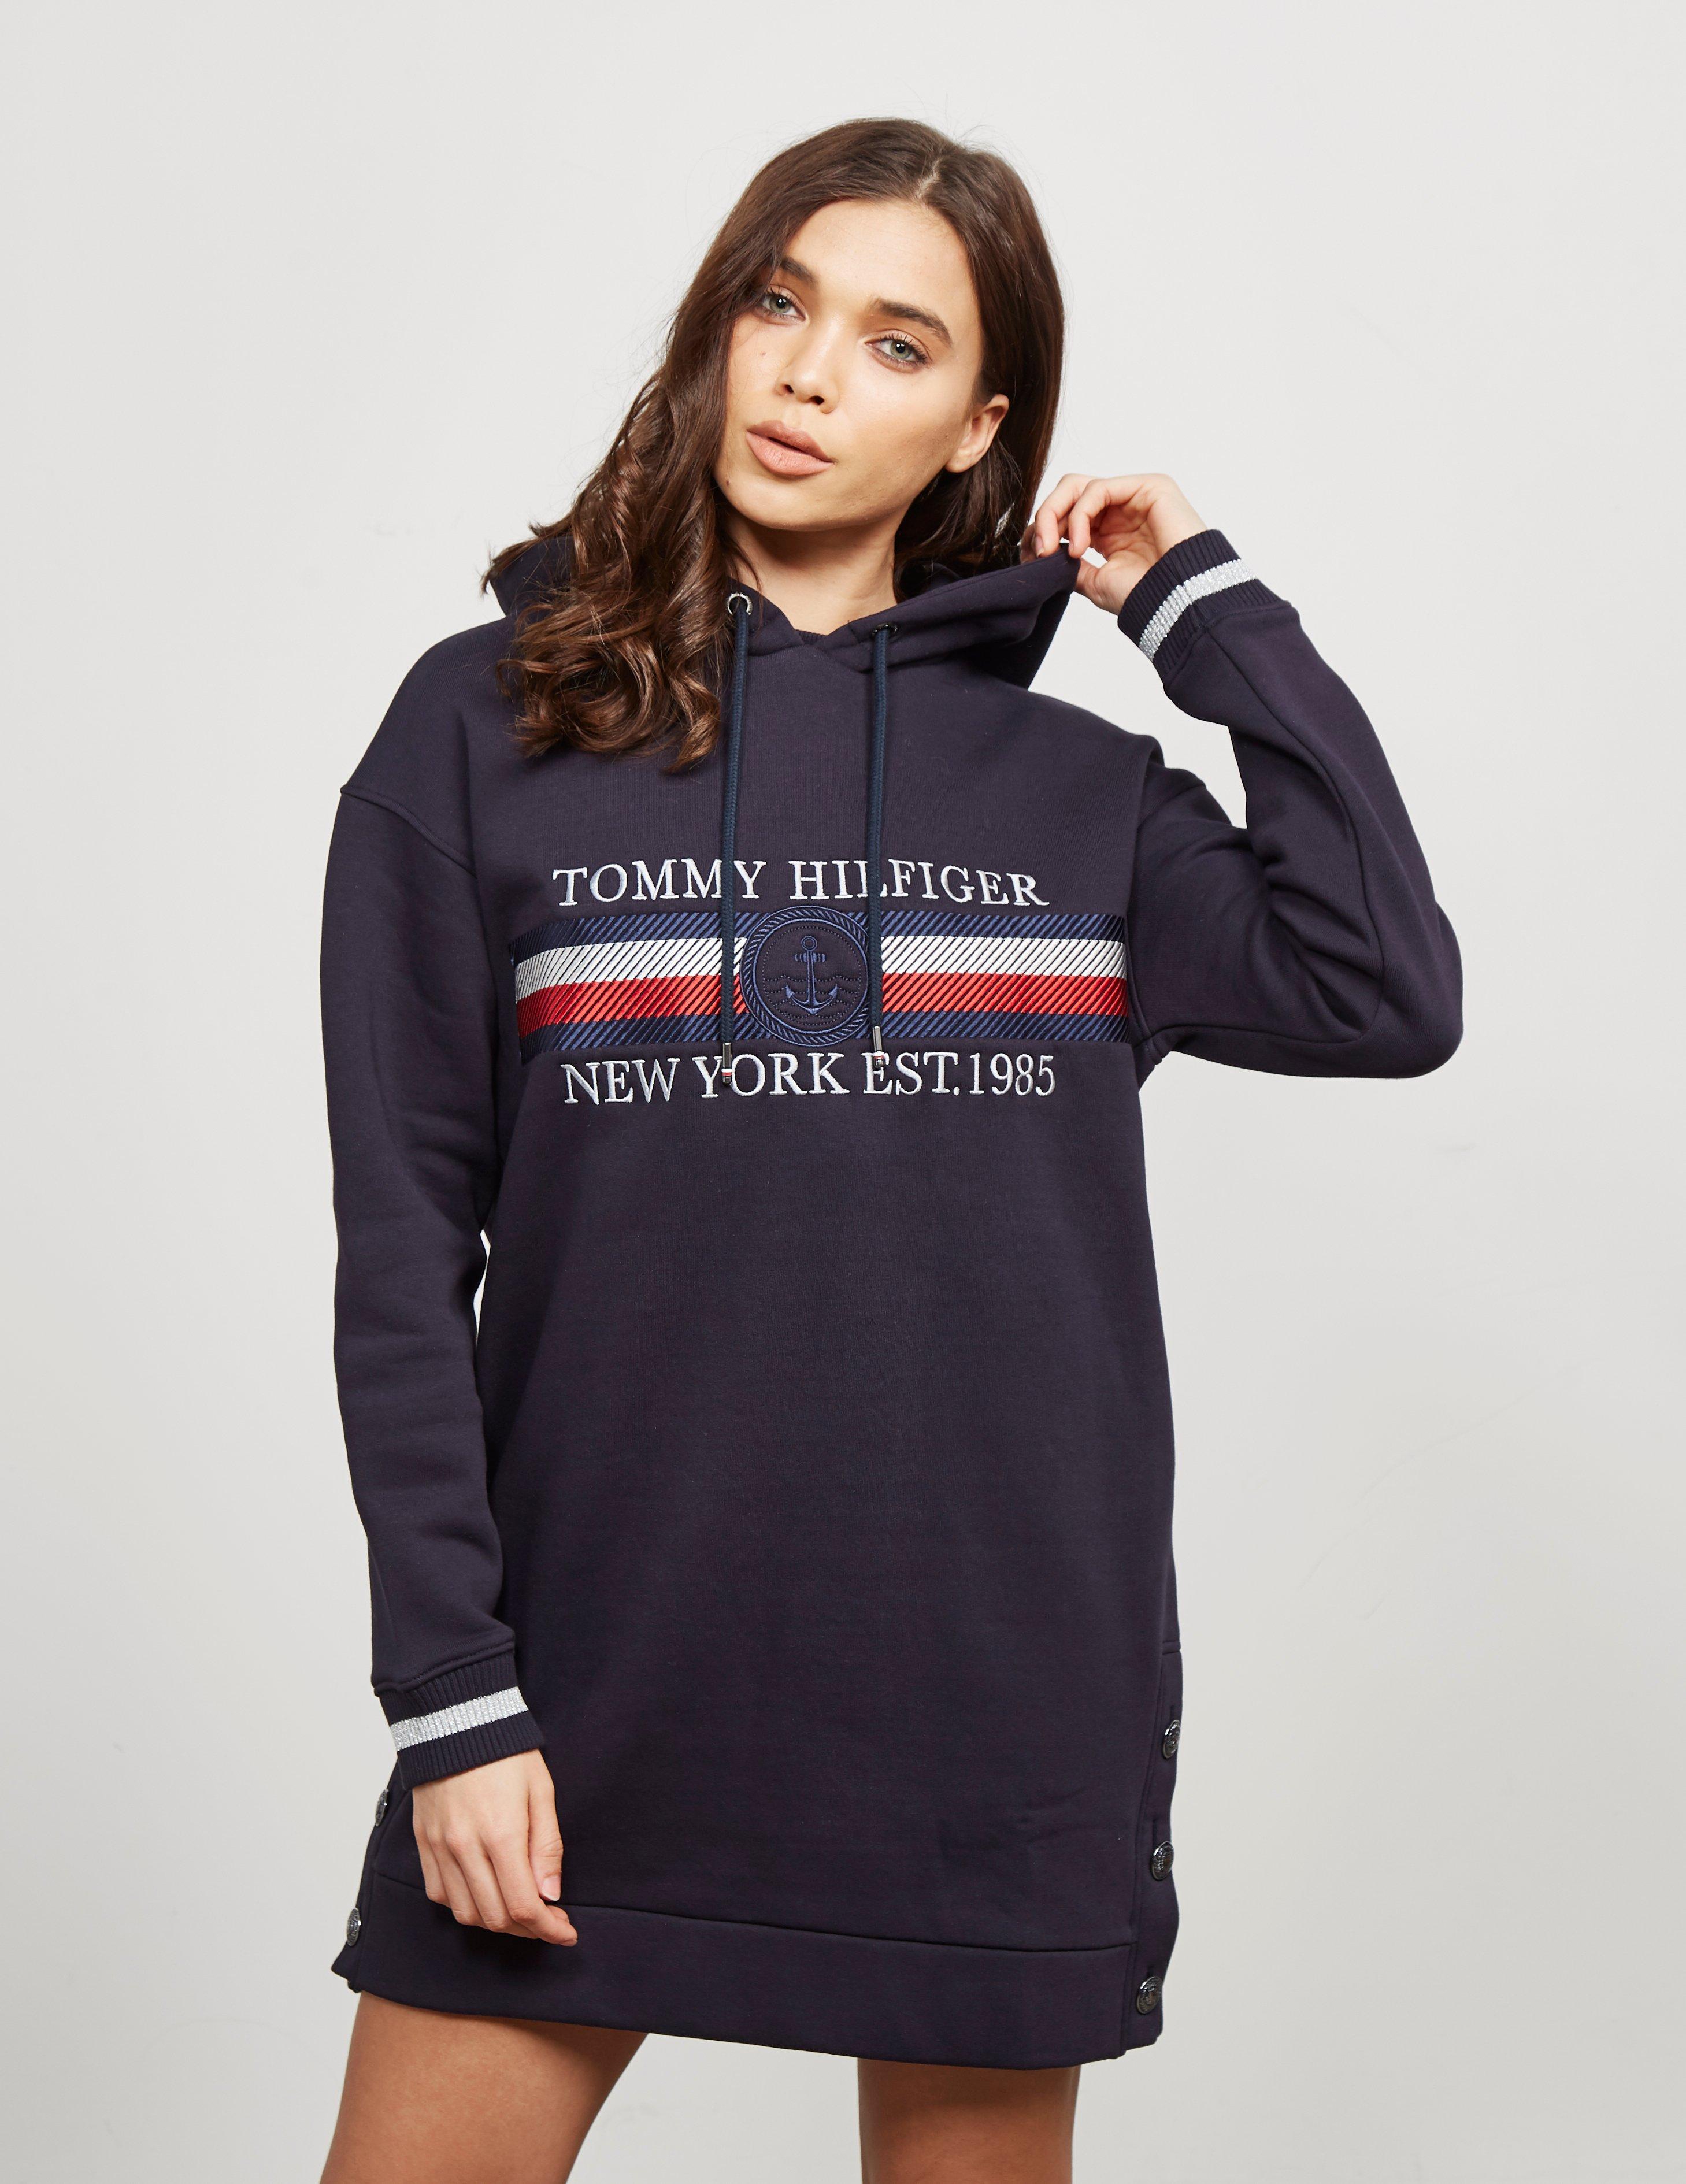 tommy icon hoodie dress